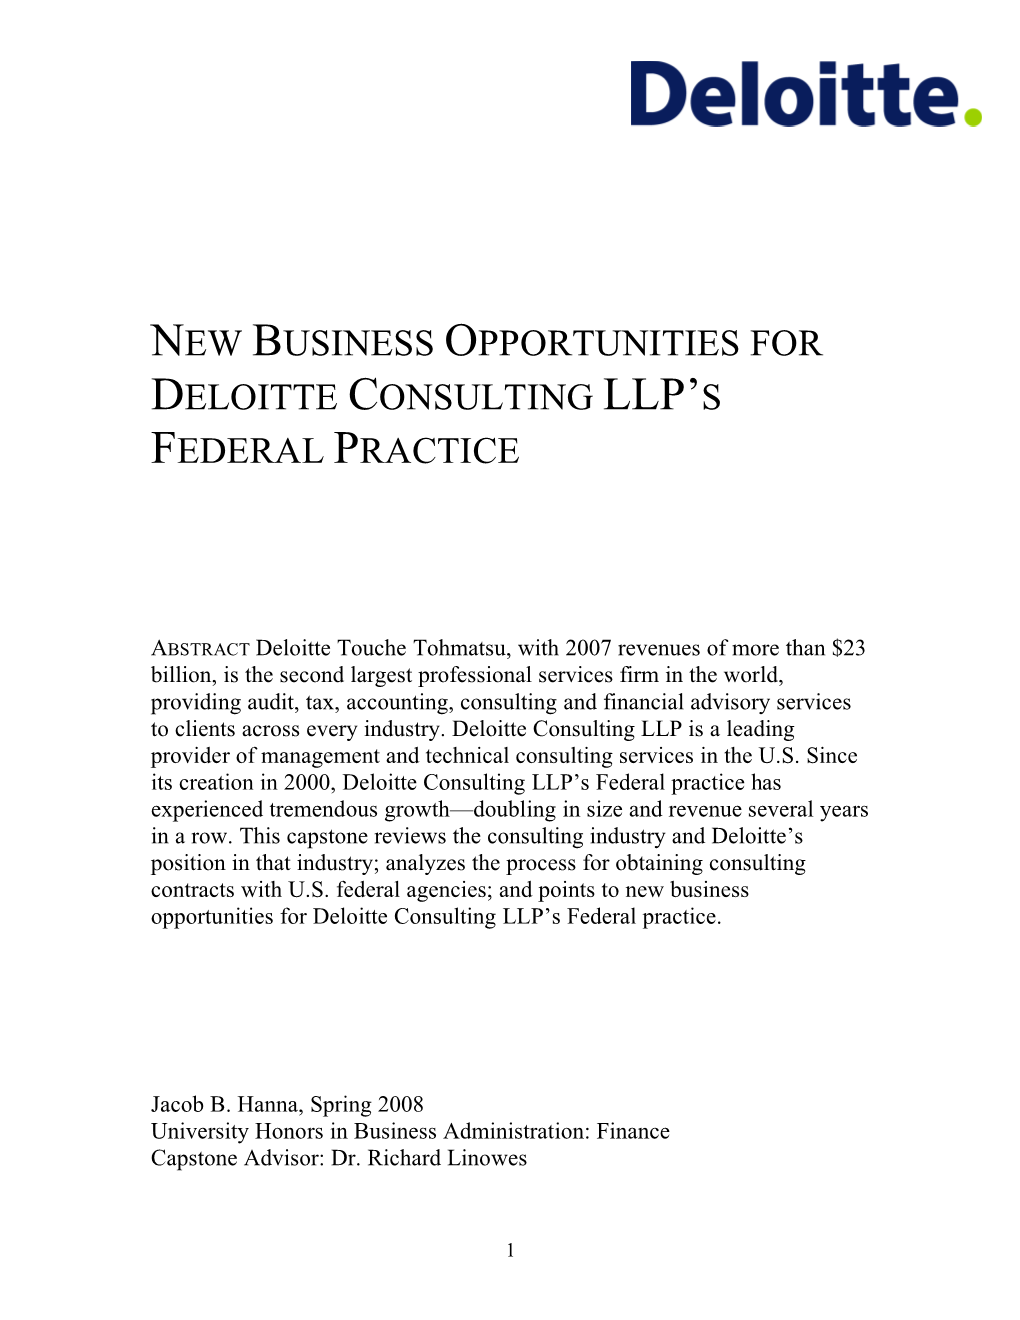 New Business Opportunities for Deloitte Consulting LLP's Federal